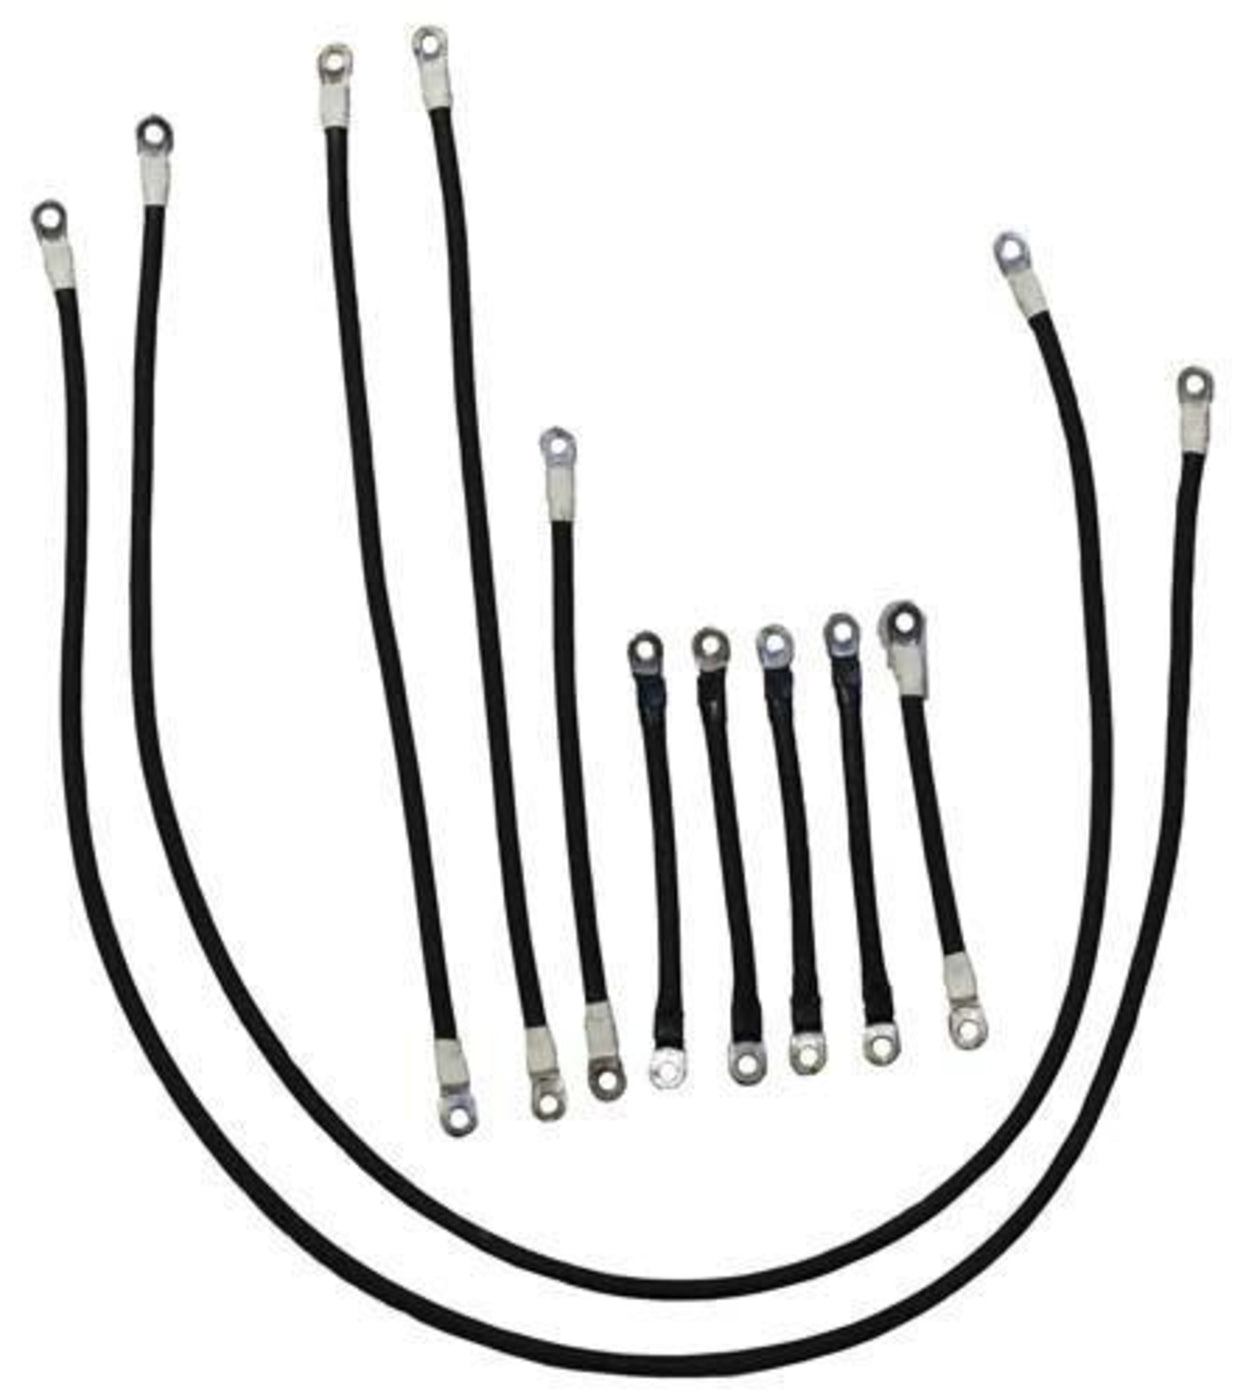 4 Gauge 600A Weld Cable Set For E-Z-GO PDS/DCS (Years 1994.5-Up)